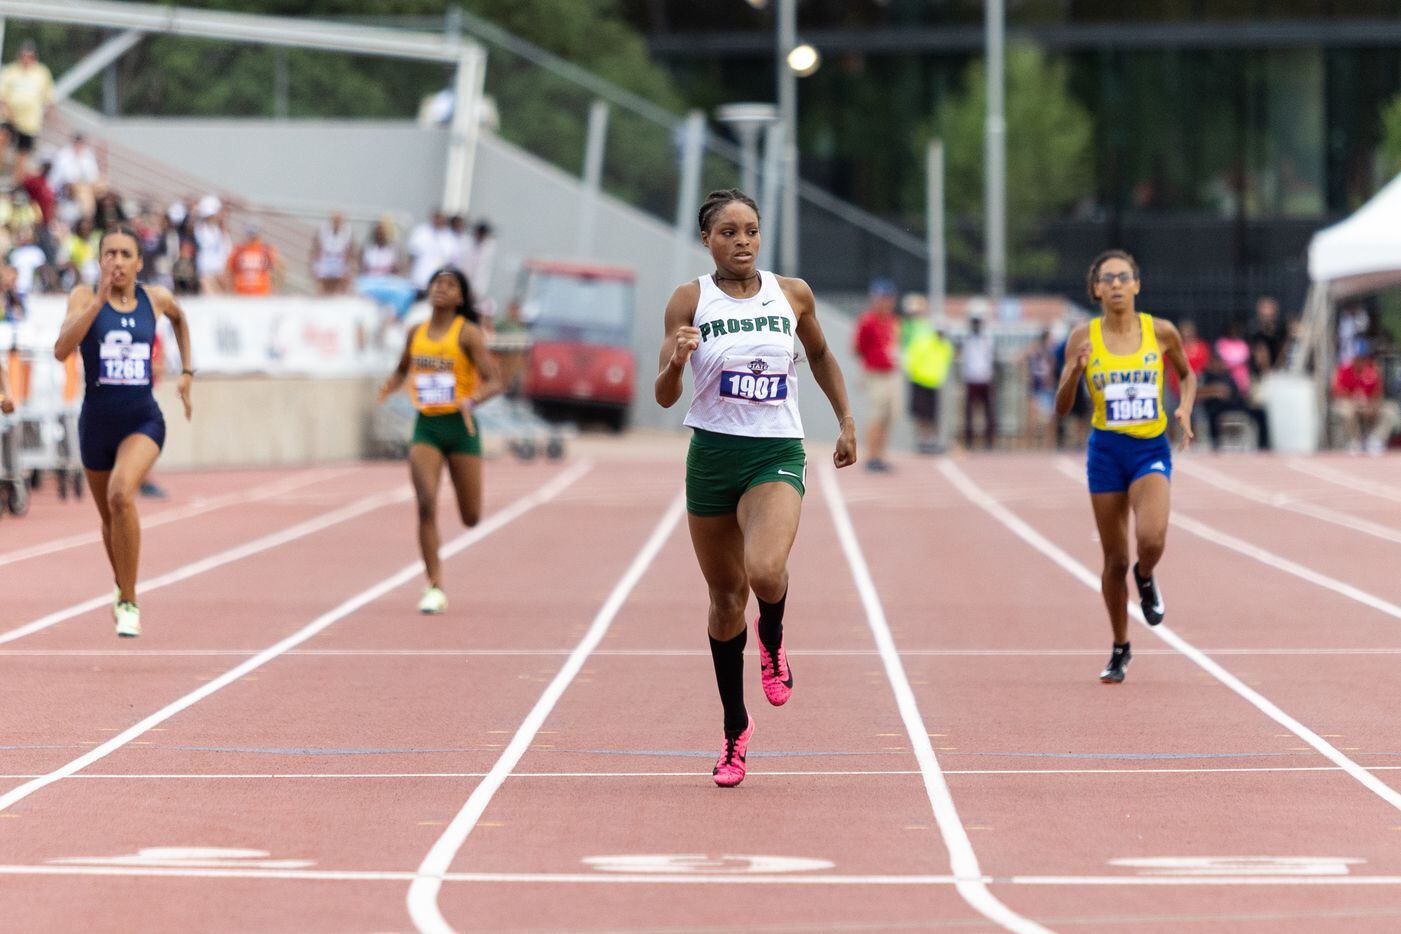 Lauren Lewis of Prosper races in the girls’ 400-meter dash at the UIL Track & Field State...